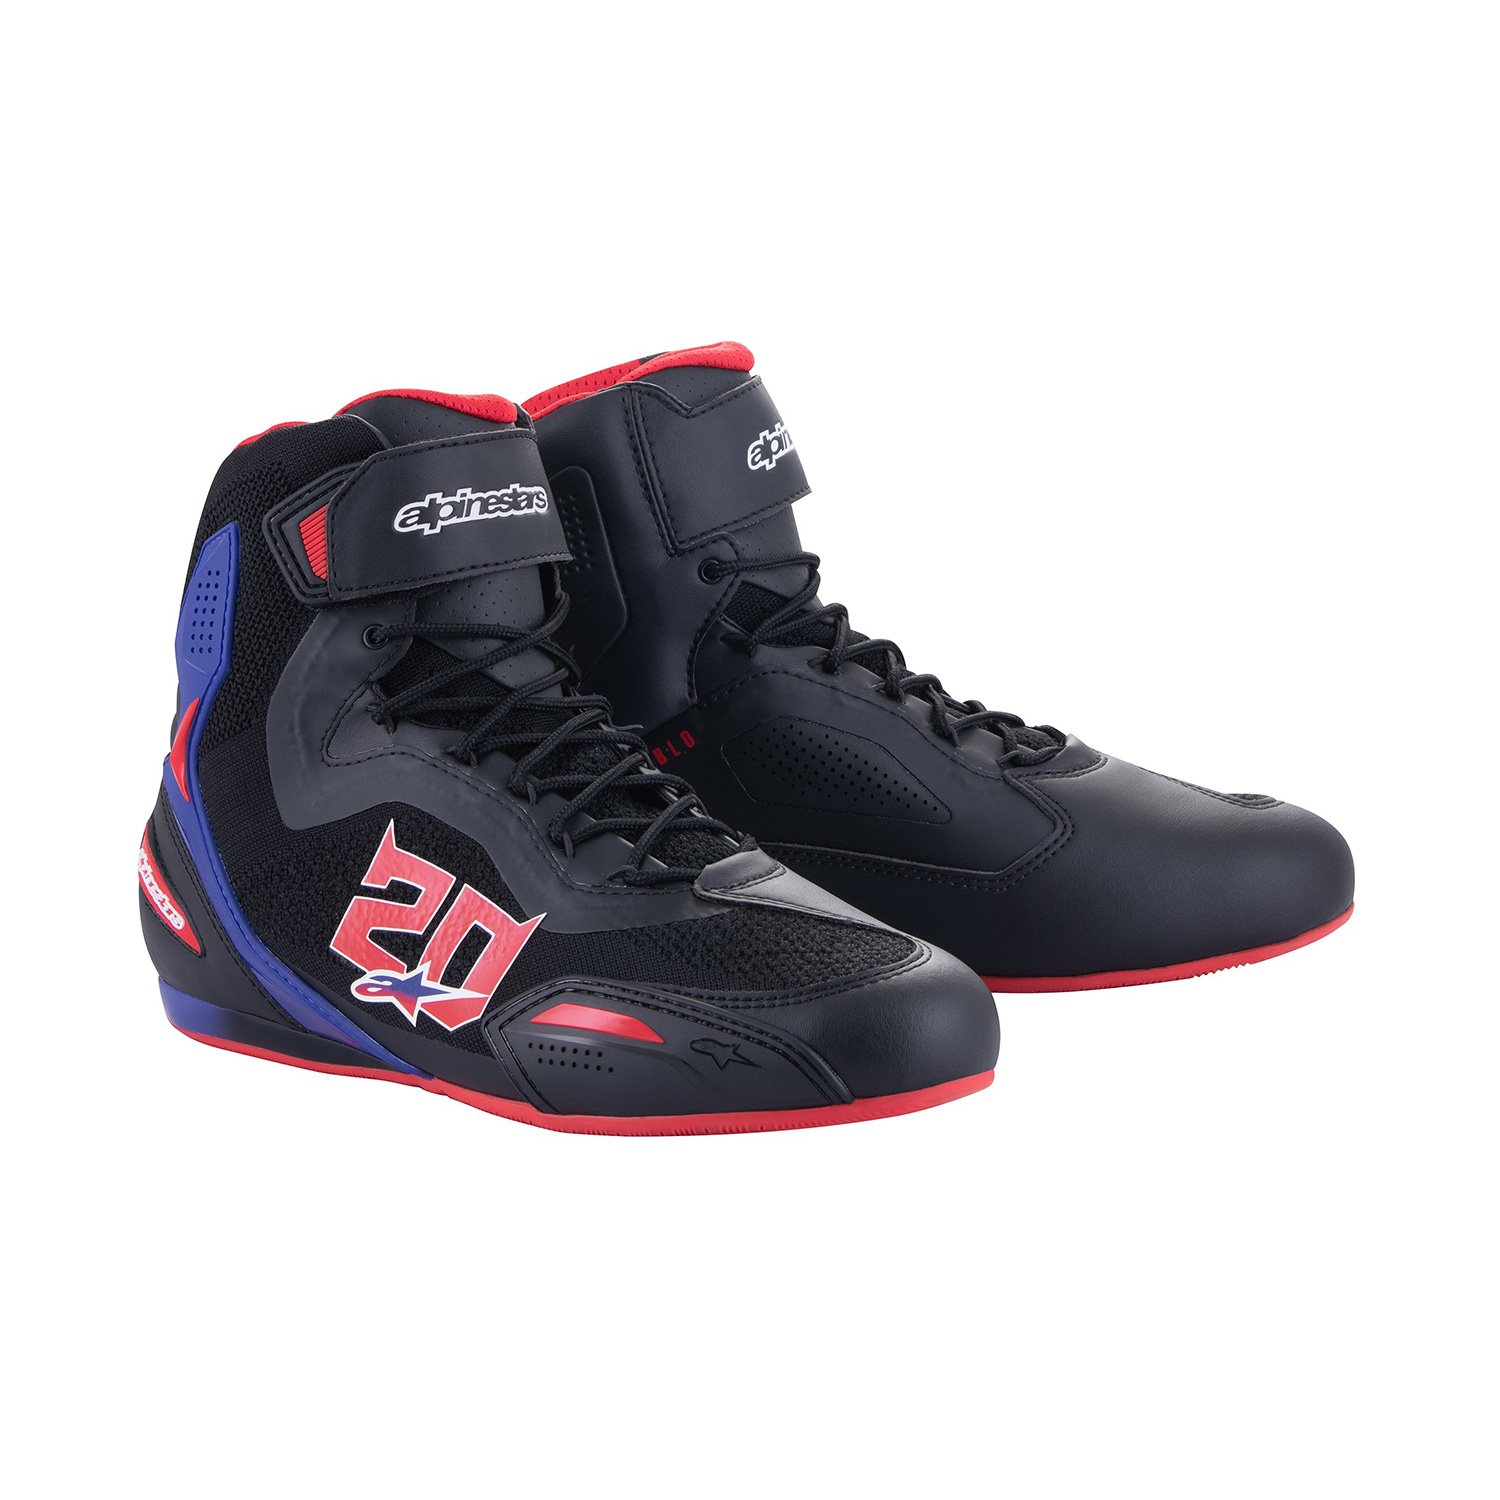 Image of Alpinestars FQ20 Faster-3 Rideknit Noir Bright Rouge Bleu Chaussures Taille US 6